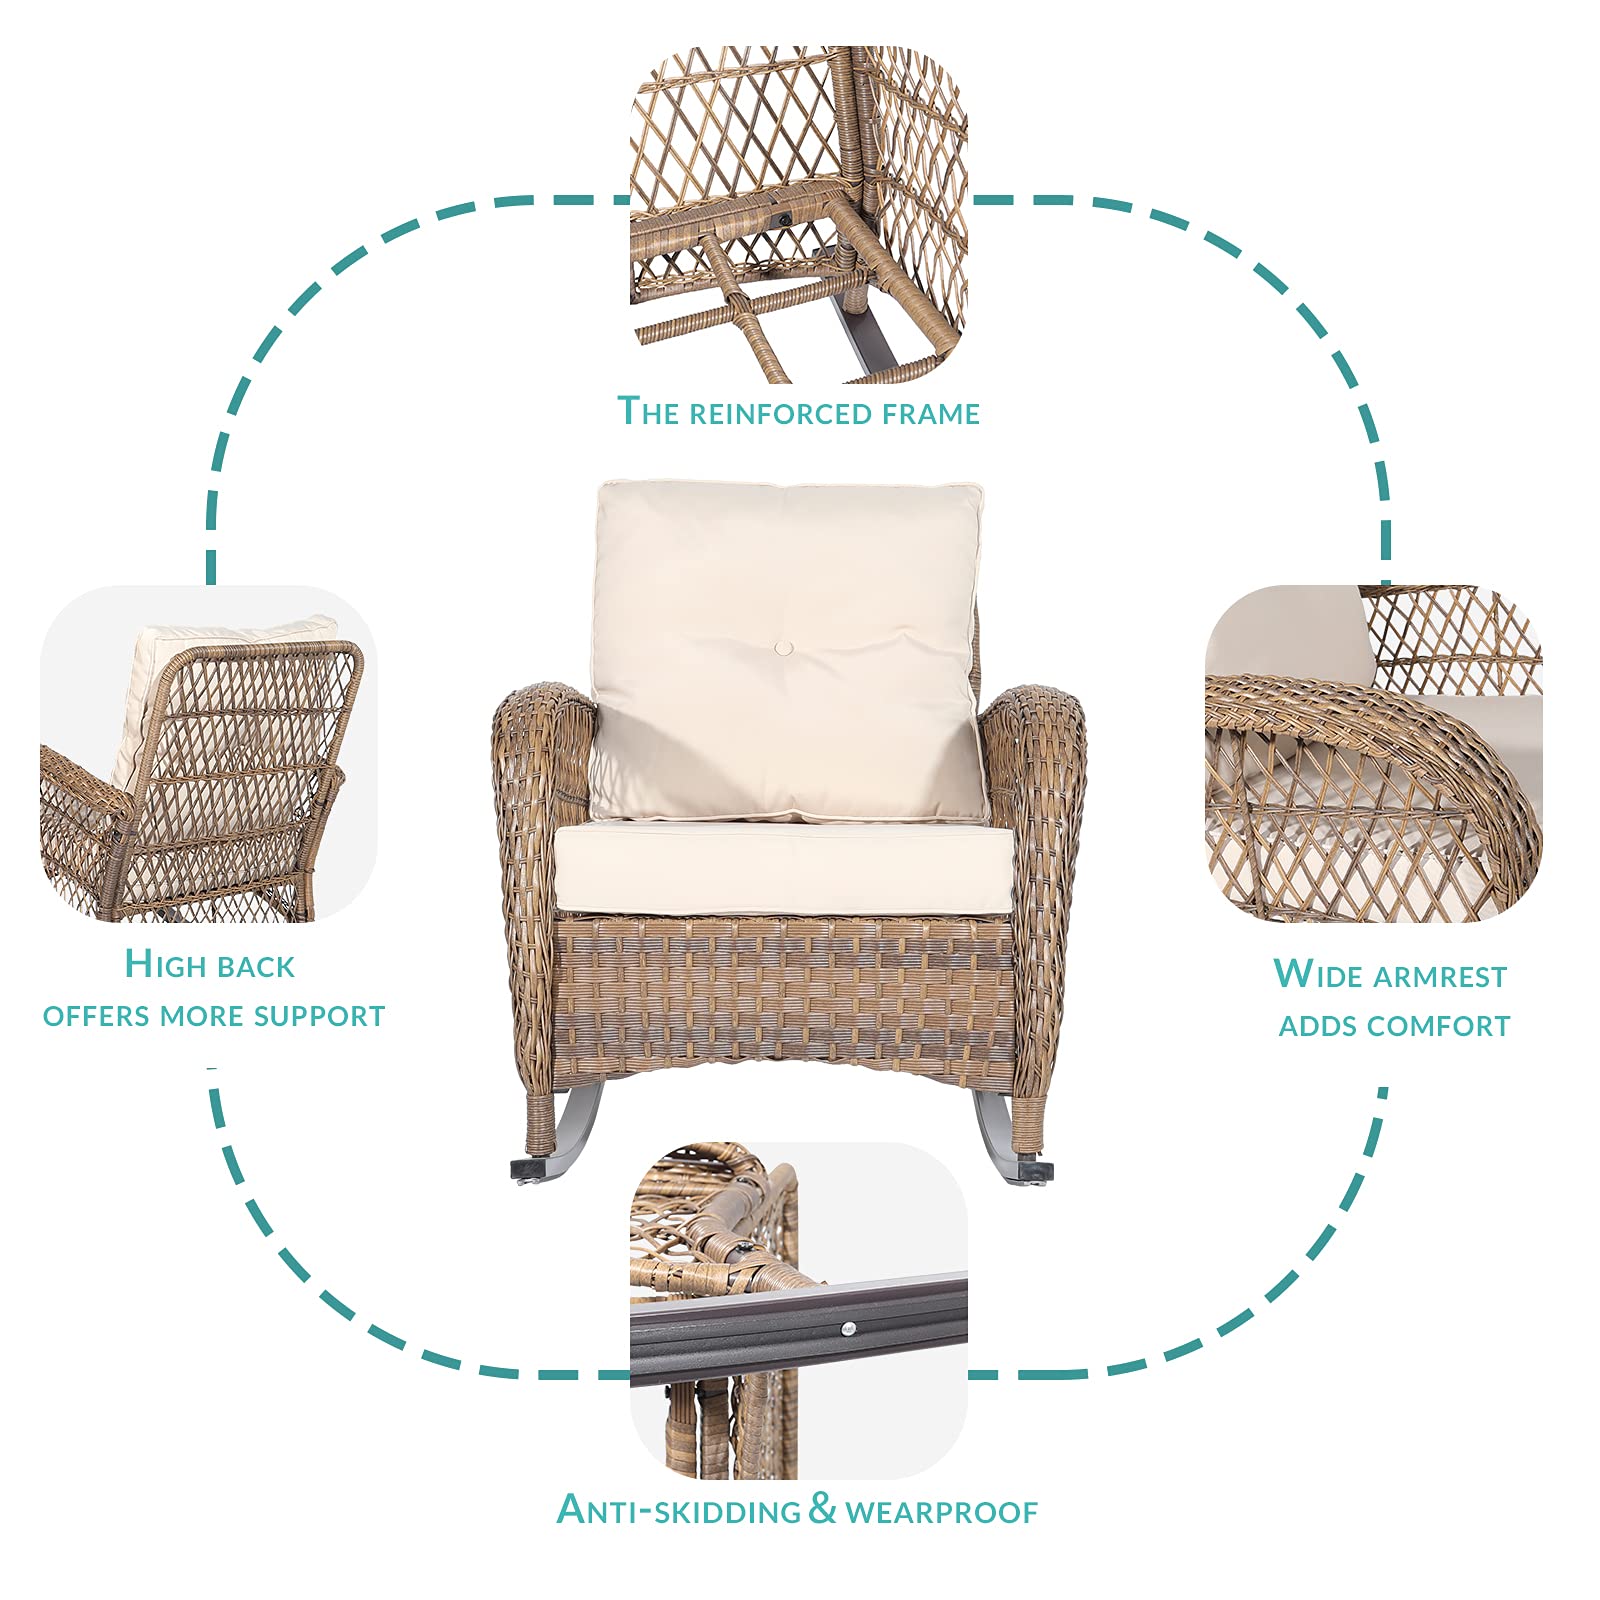 MEETWARM 3 Pieces Patio Wicker Rocking Chair Set, Rattan Outdoor Rocker Chairs Set with Cushions and Glass-Top Coffee Table, Conversation Bistro Set for Porch & Backyard - Beige - image 2 of 7